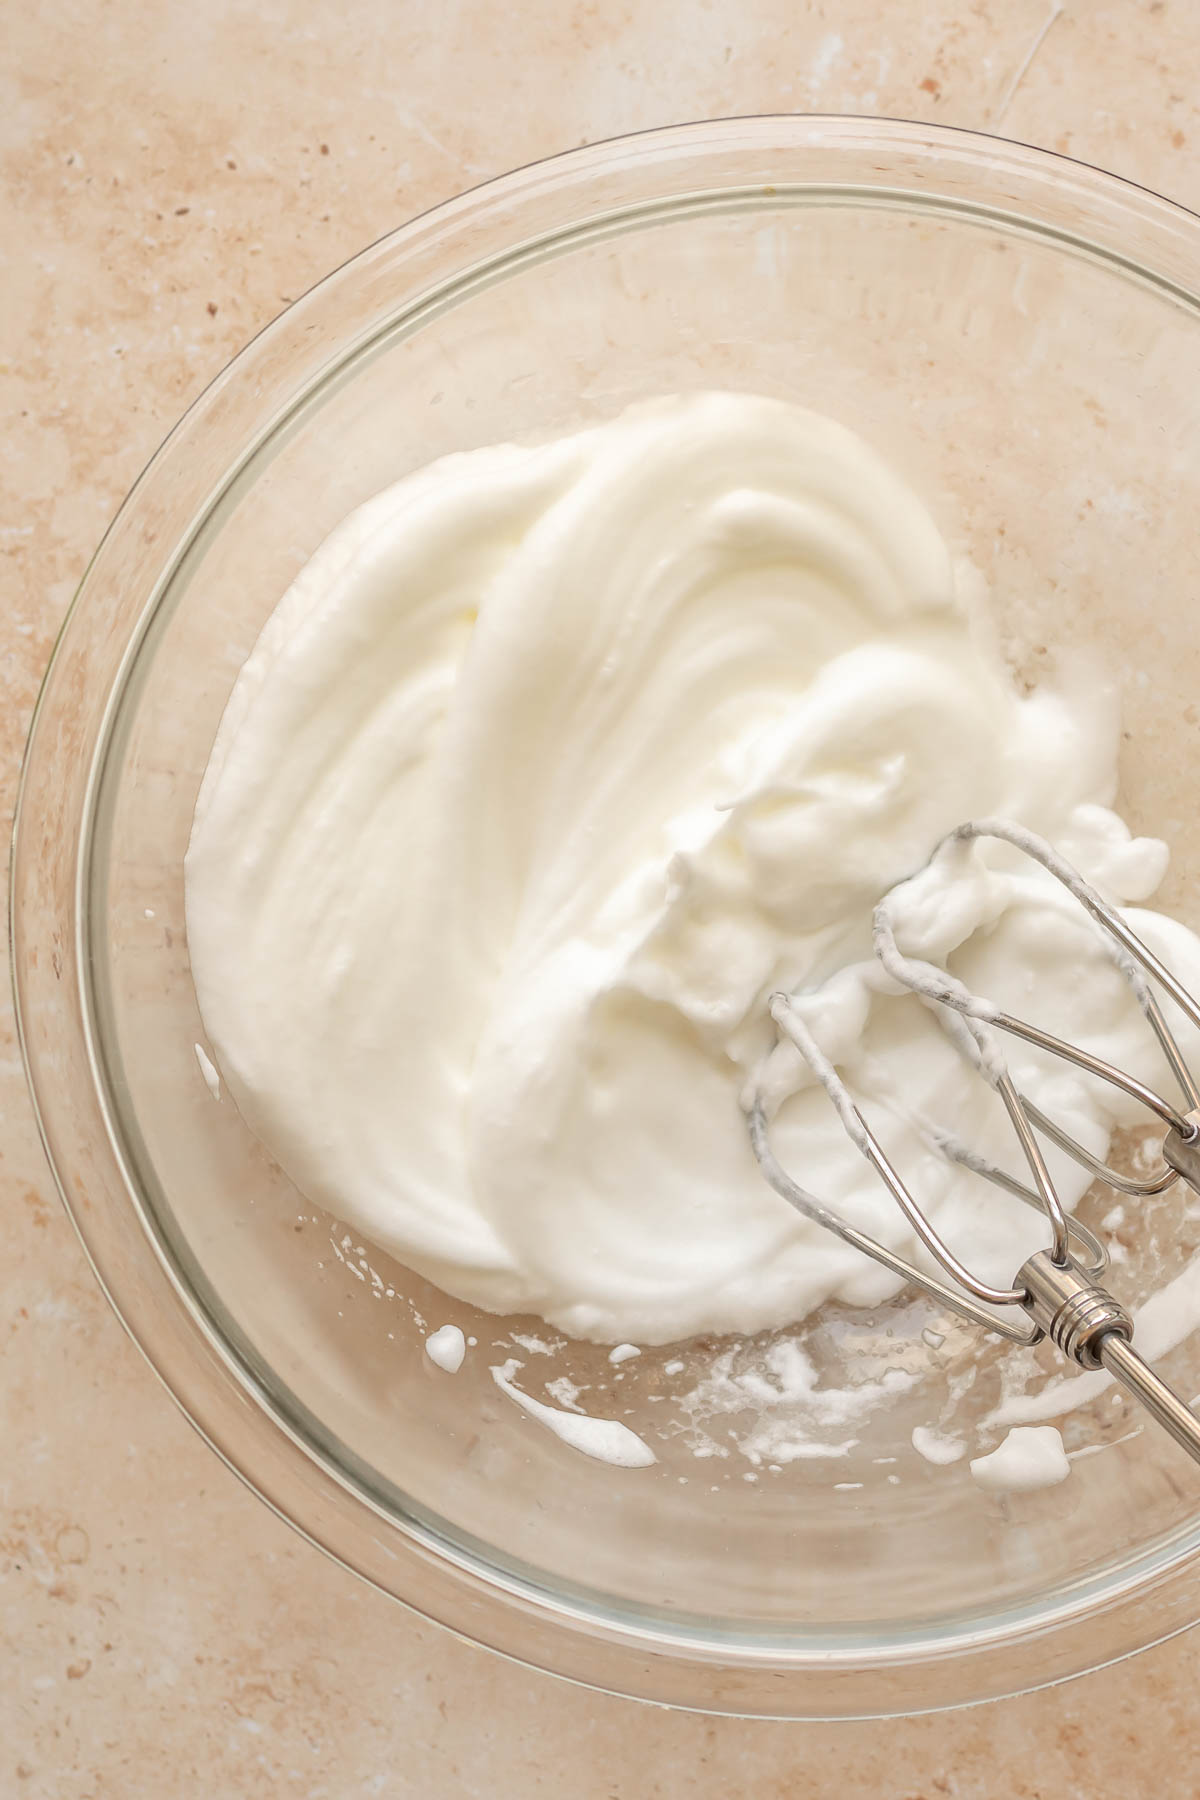 A hand mixes whips egg whites in a bowl.